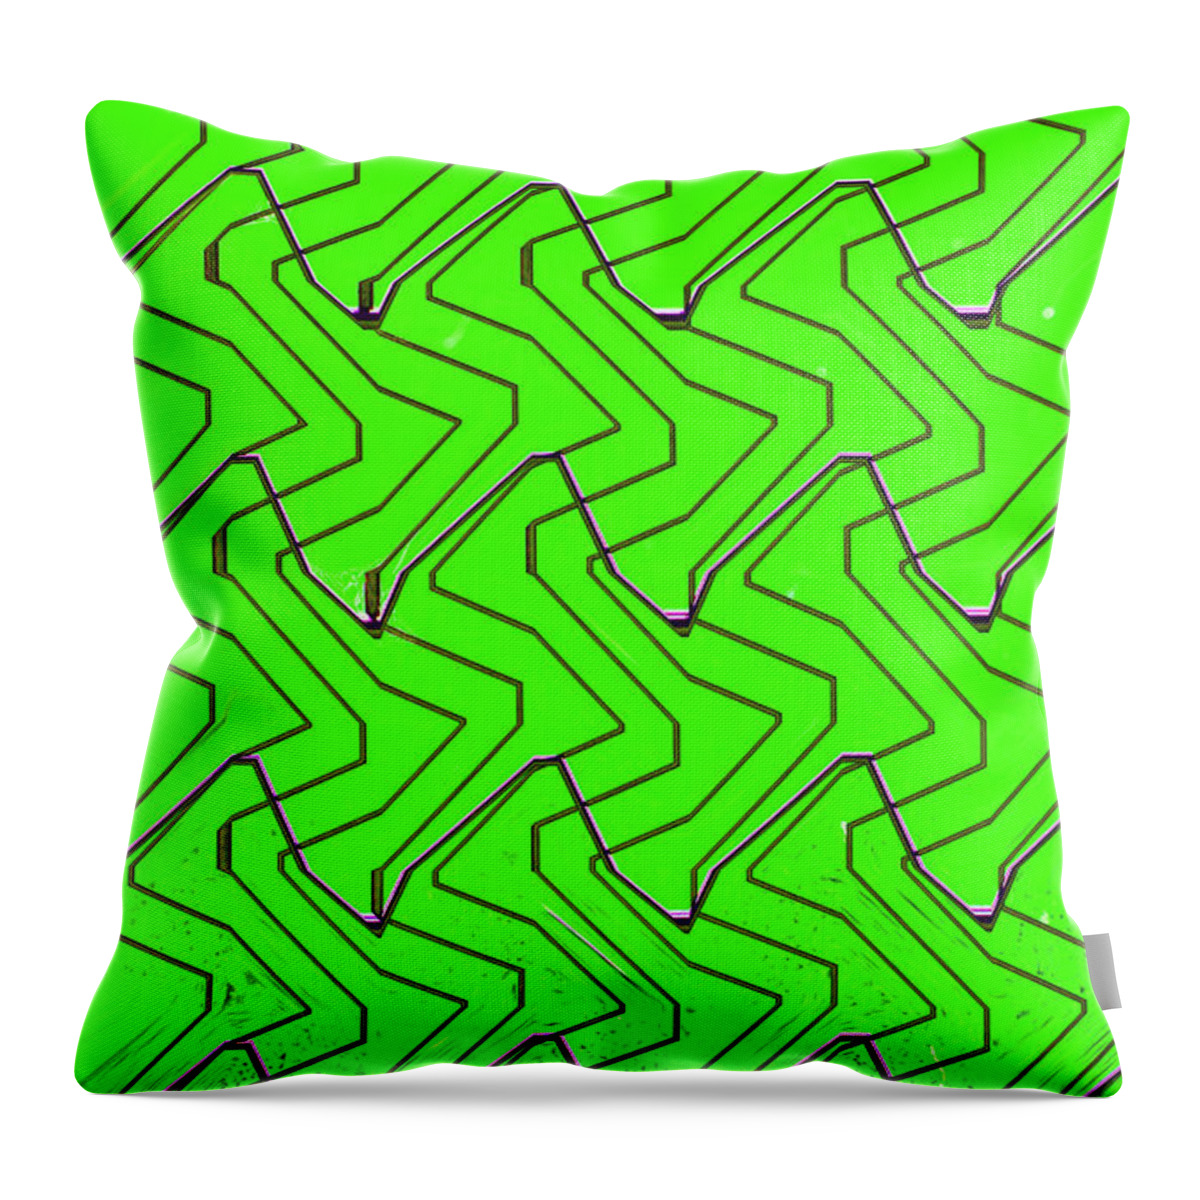 Green Grass Through The Wire Fence Throw Pillow featuring the digital art Green Grass Through The Wire Fence by Tom Janca